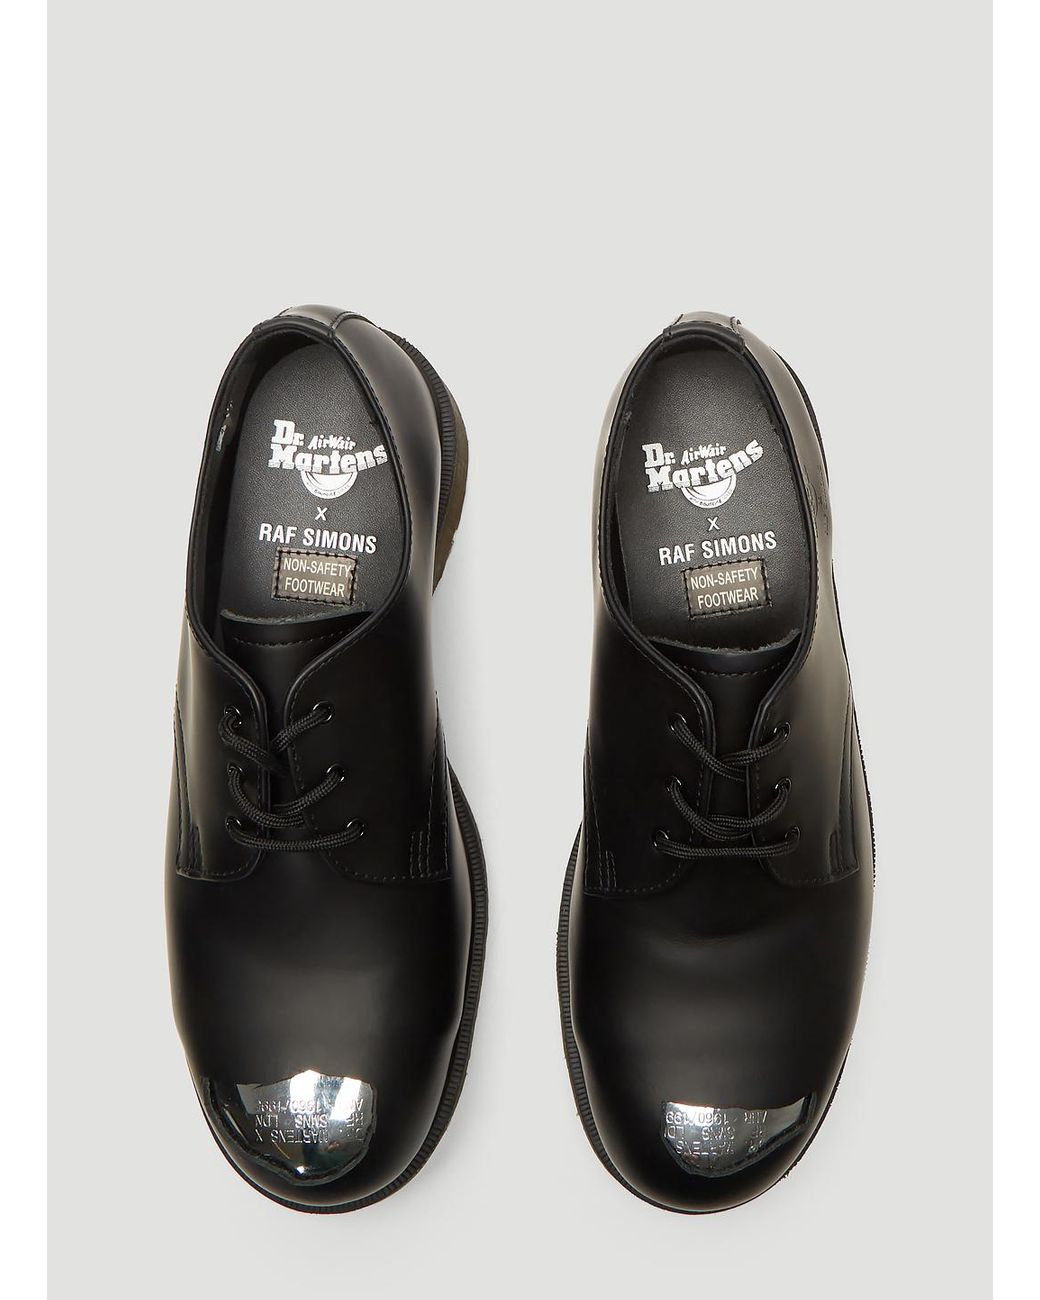 Papua New Guinea Mediate Instrument Raf Simons X Dr. Martens Exposed Steel Toe Shoes In Black for Men | Lyst